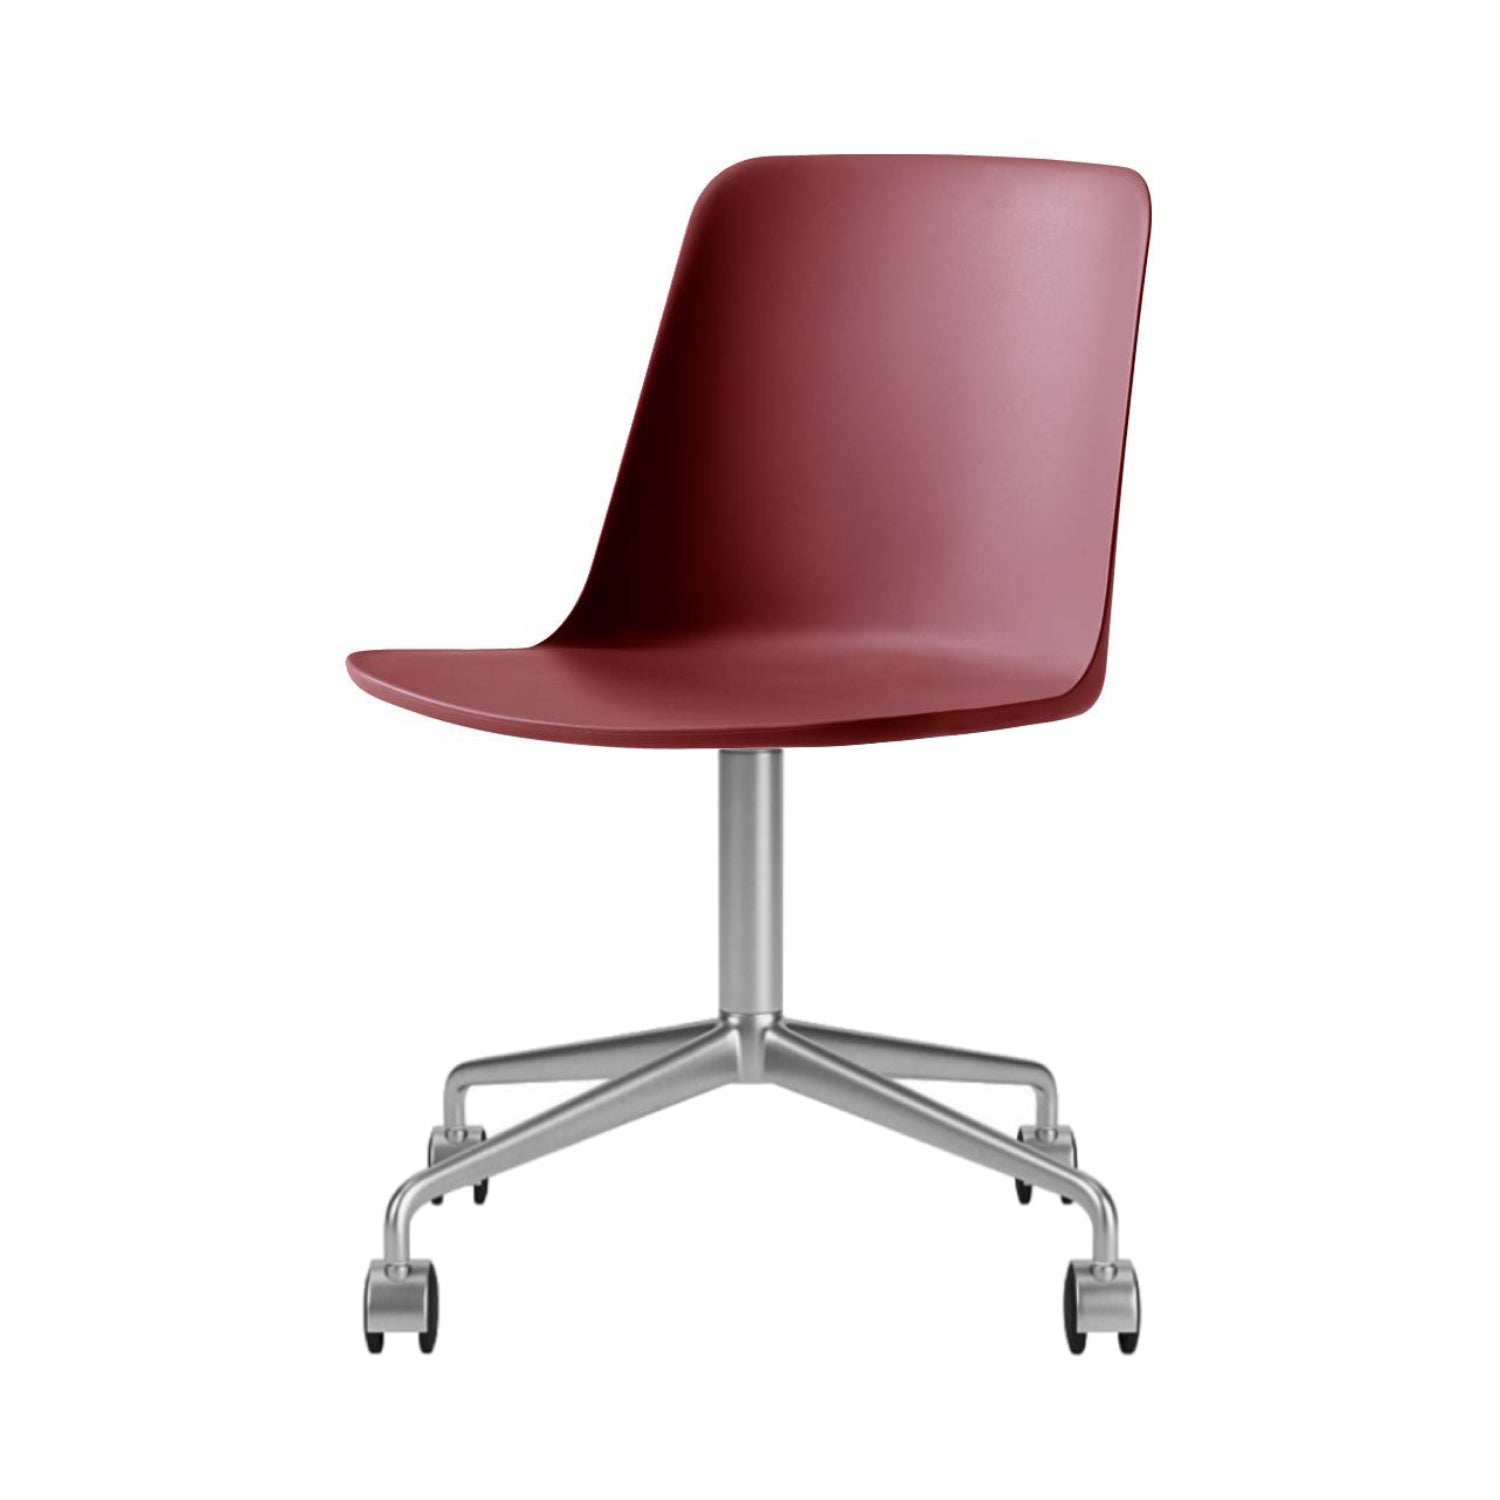 Rely Chair HW21: Red Brown + Polished Aluminum